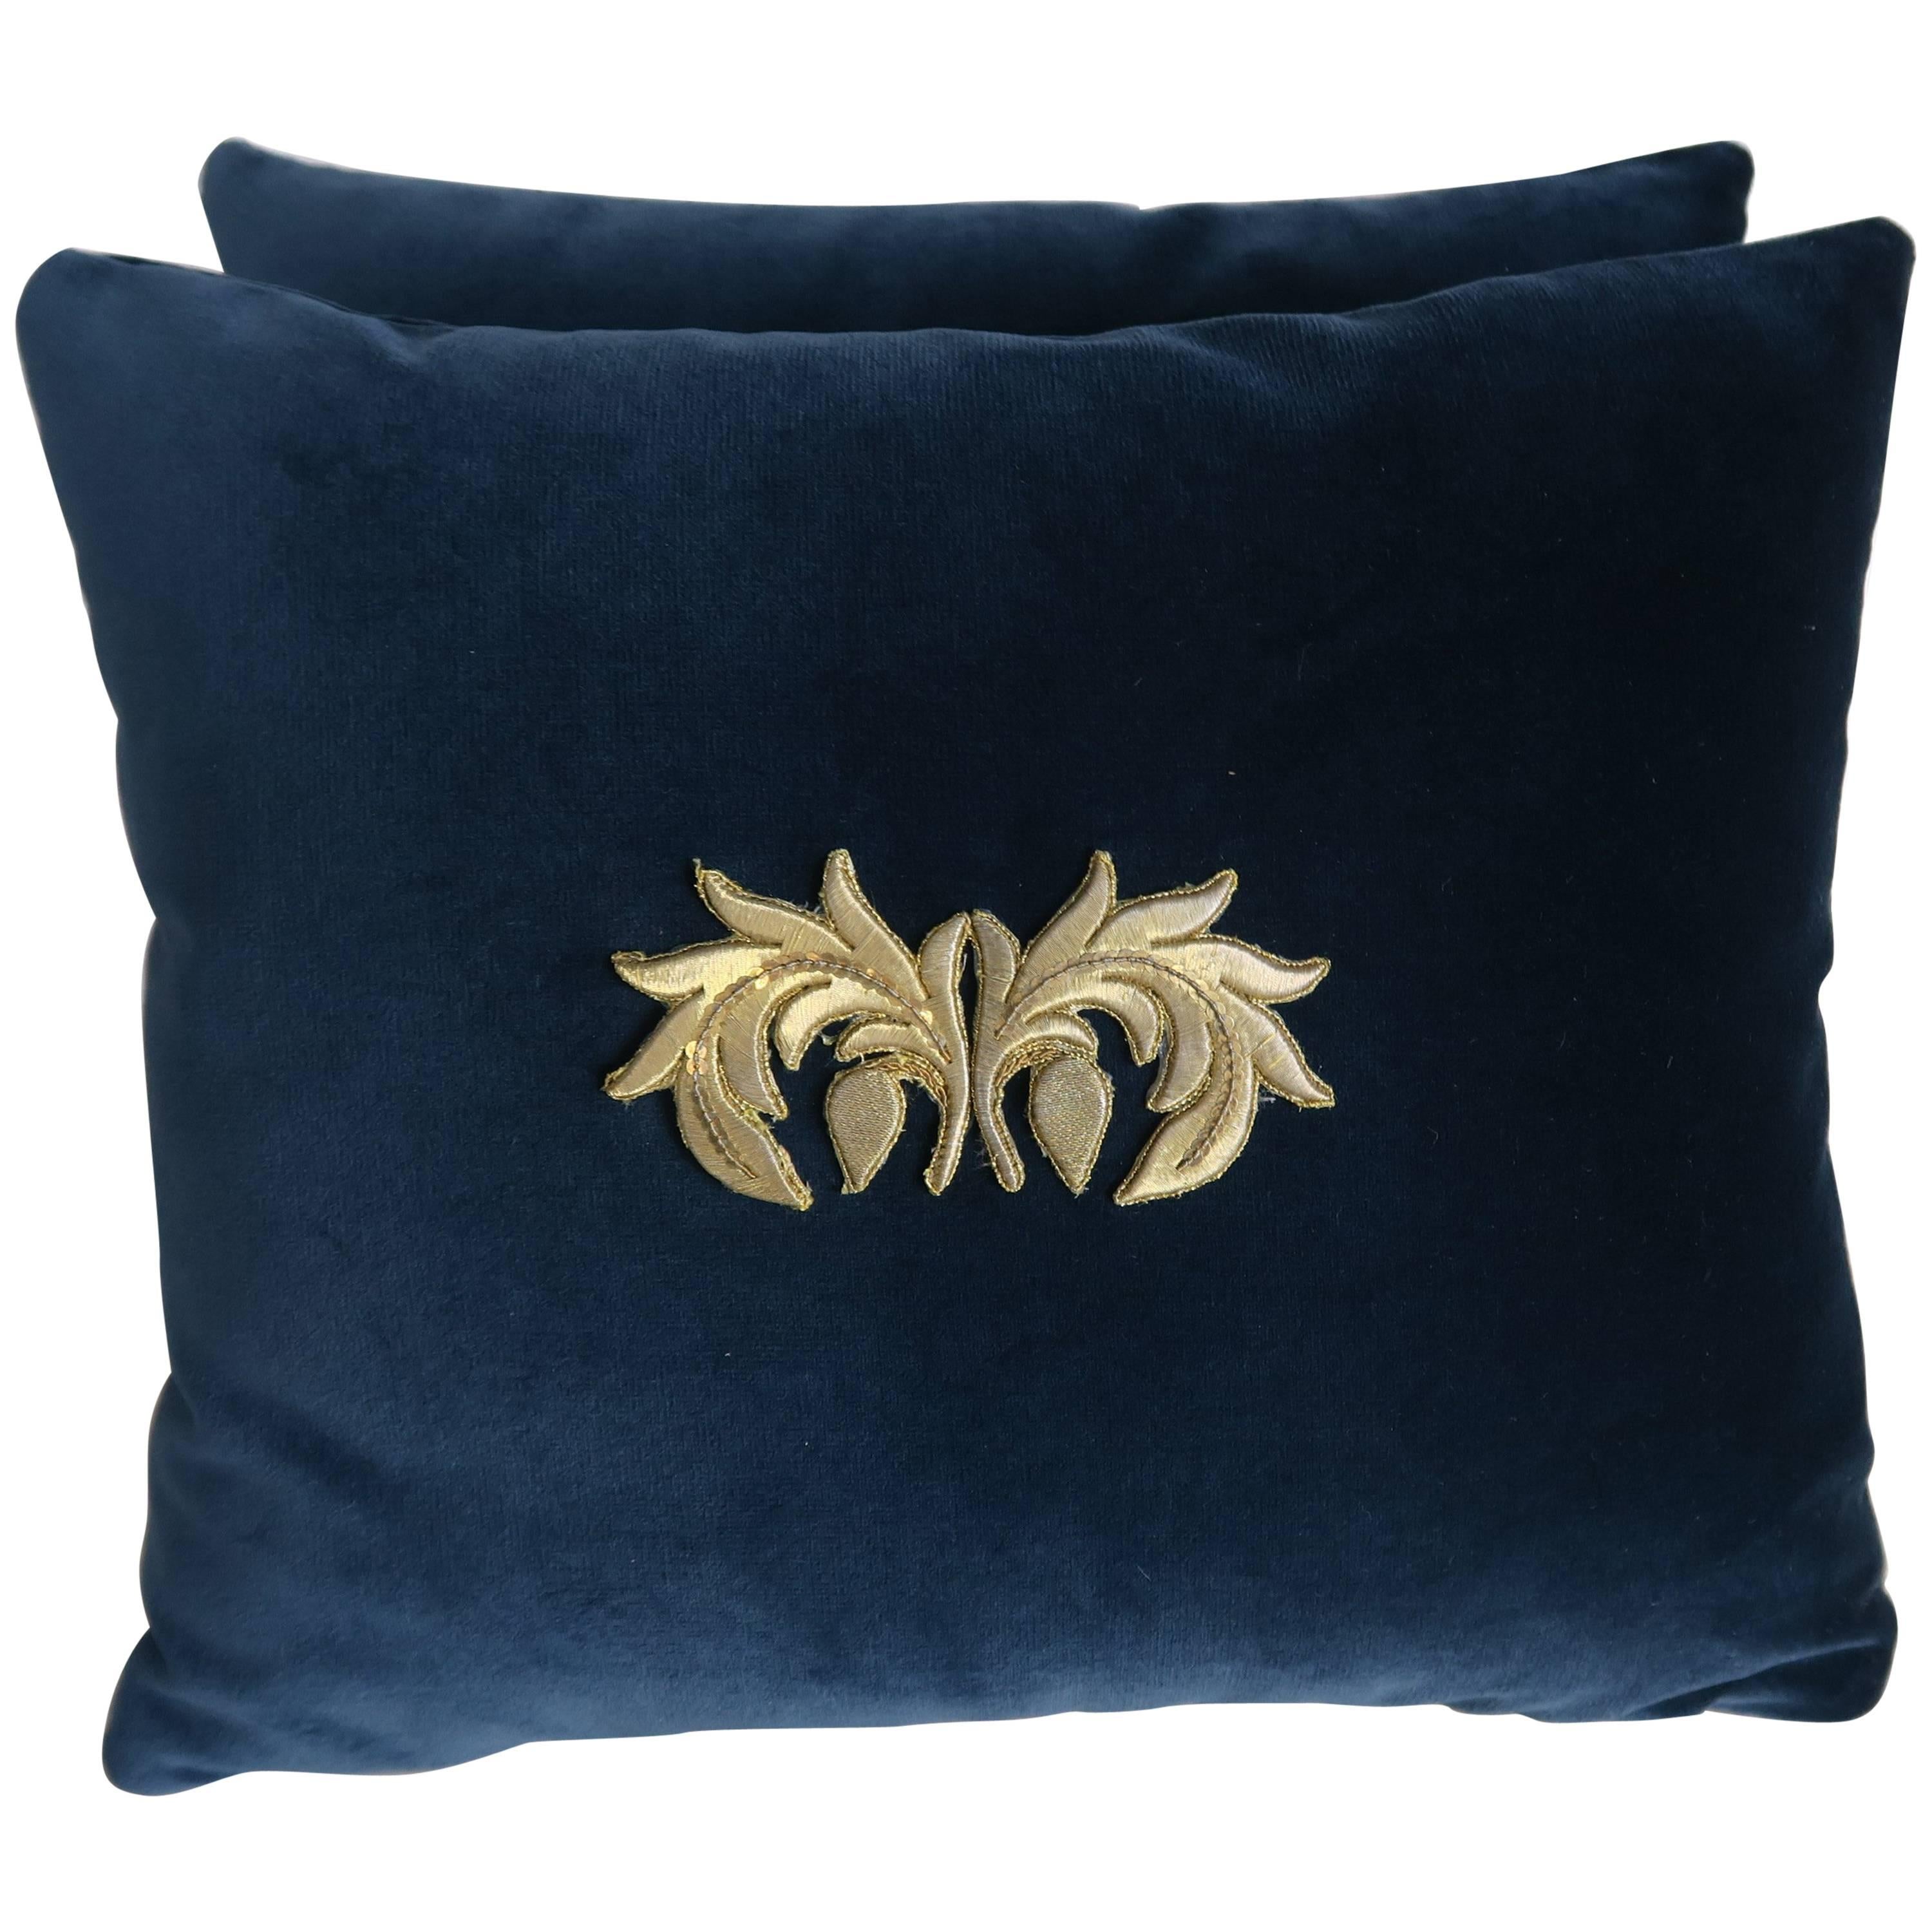 Pair of Metallic Gold Appliqued Pillows by Melissa Levinson